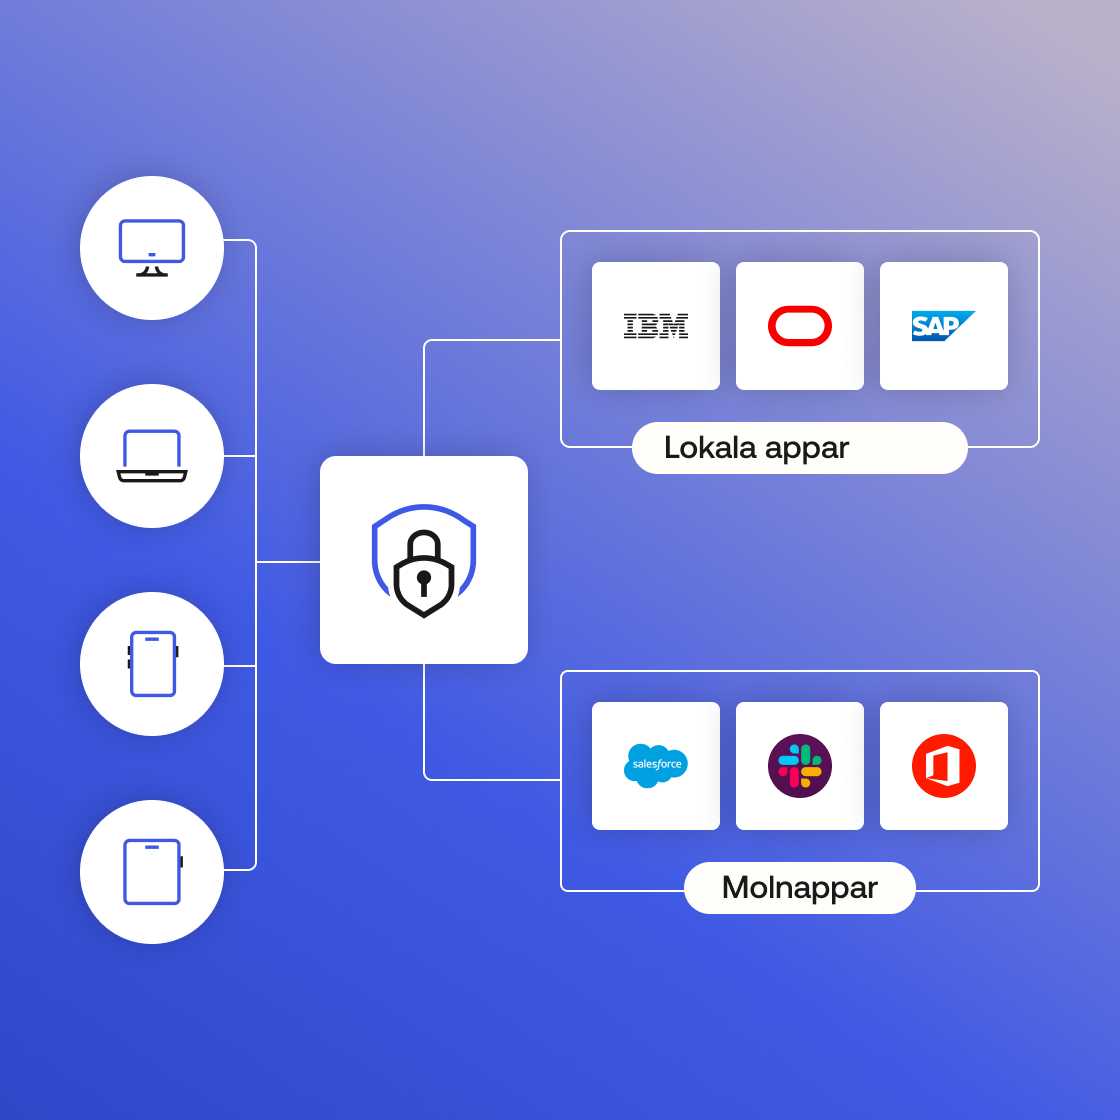 A graphic of icons of a computer, tablet, phone, and laptop, all securely connected to their apps through a padlock icon.